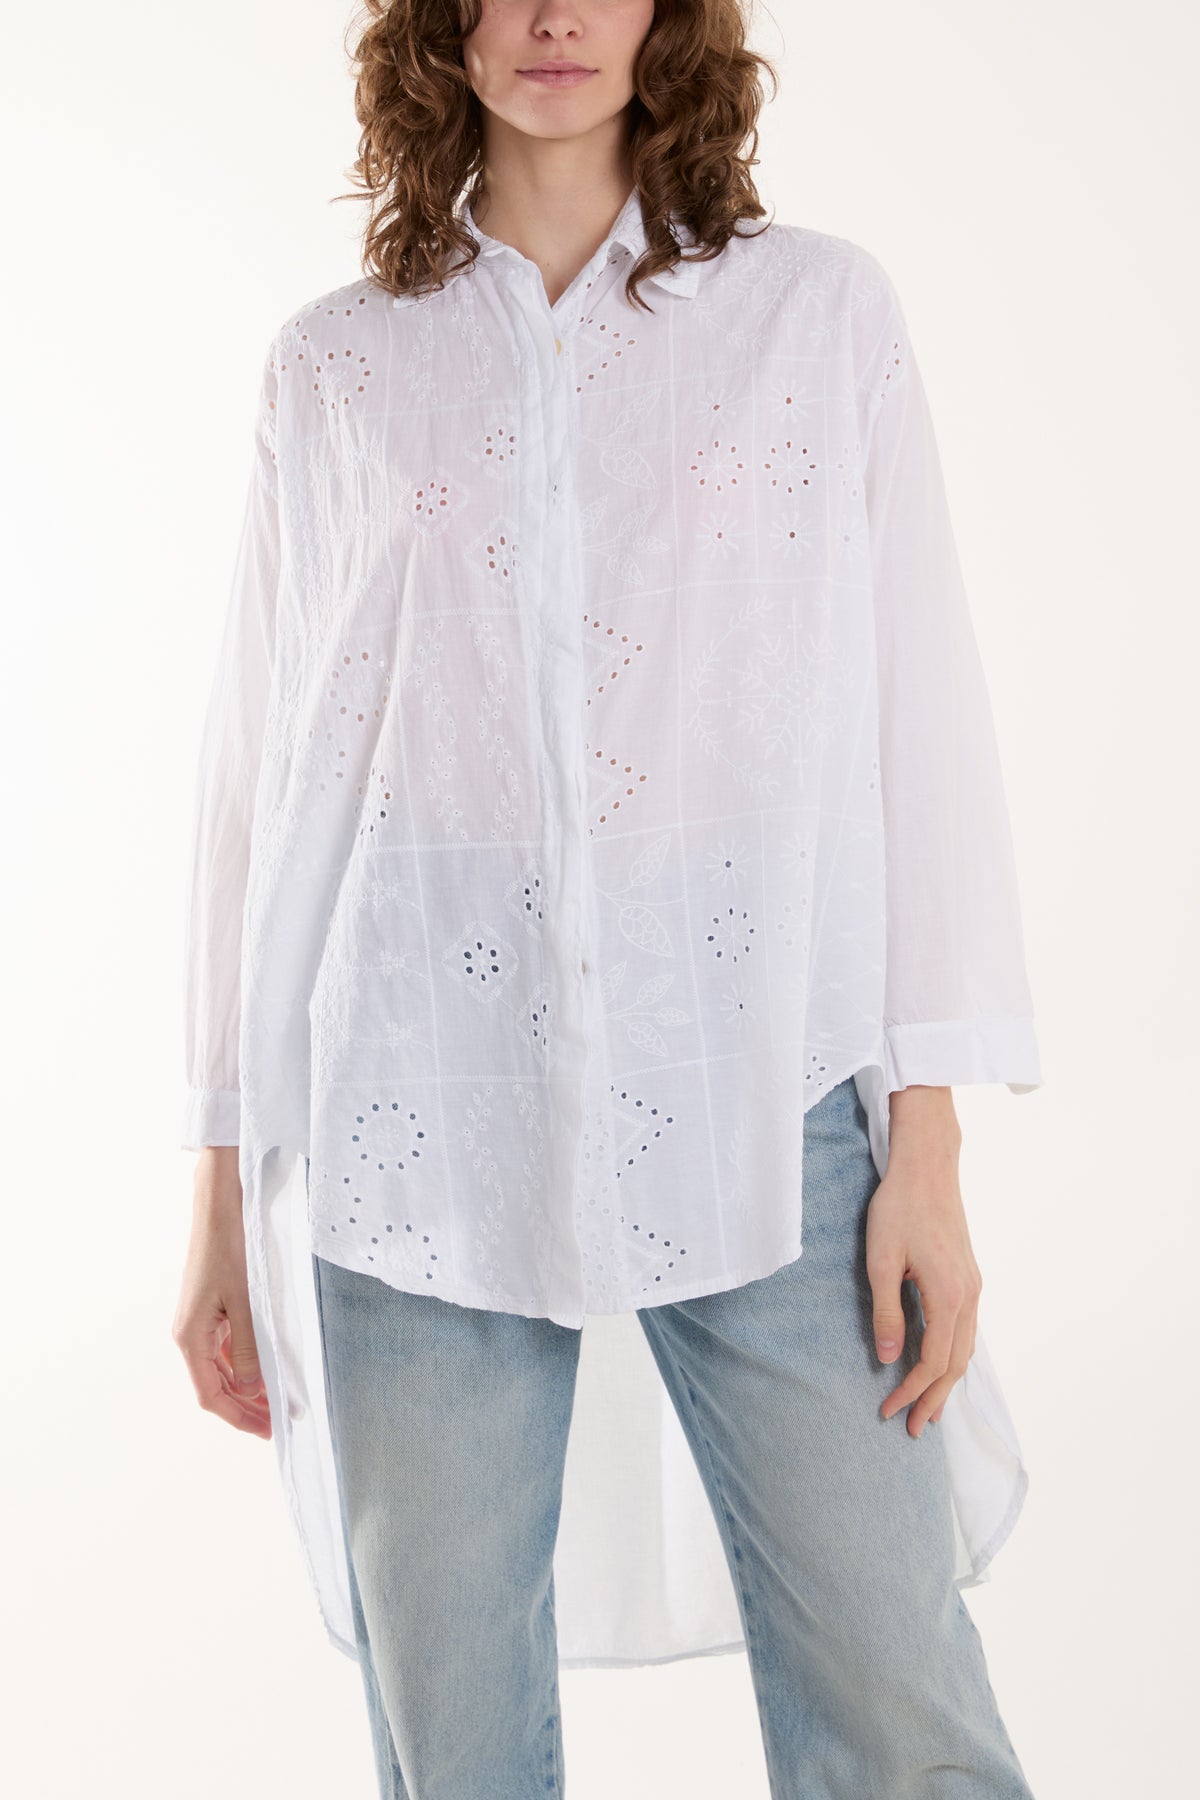 Tile Pattern Broderie Anglaise Shirt